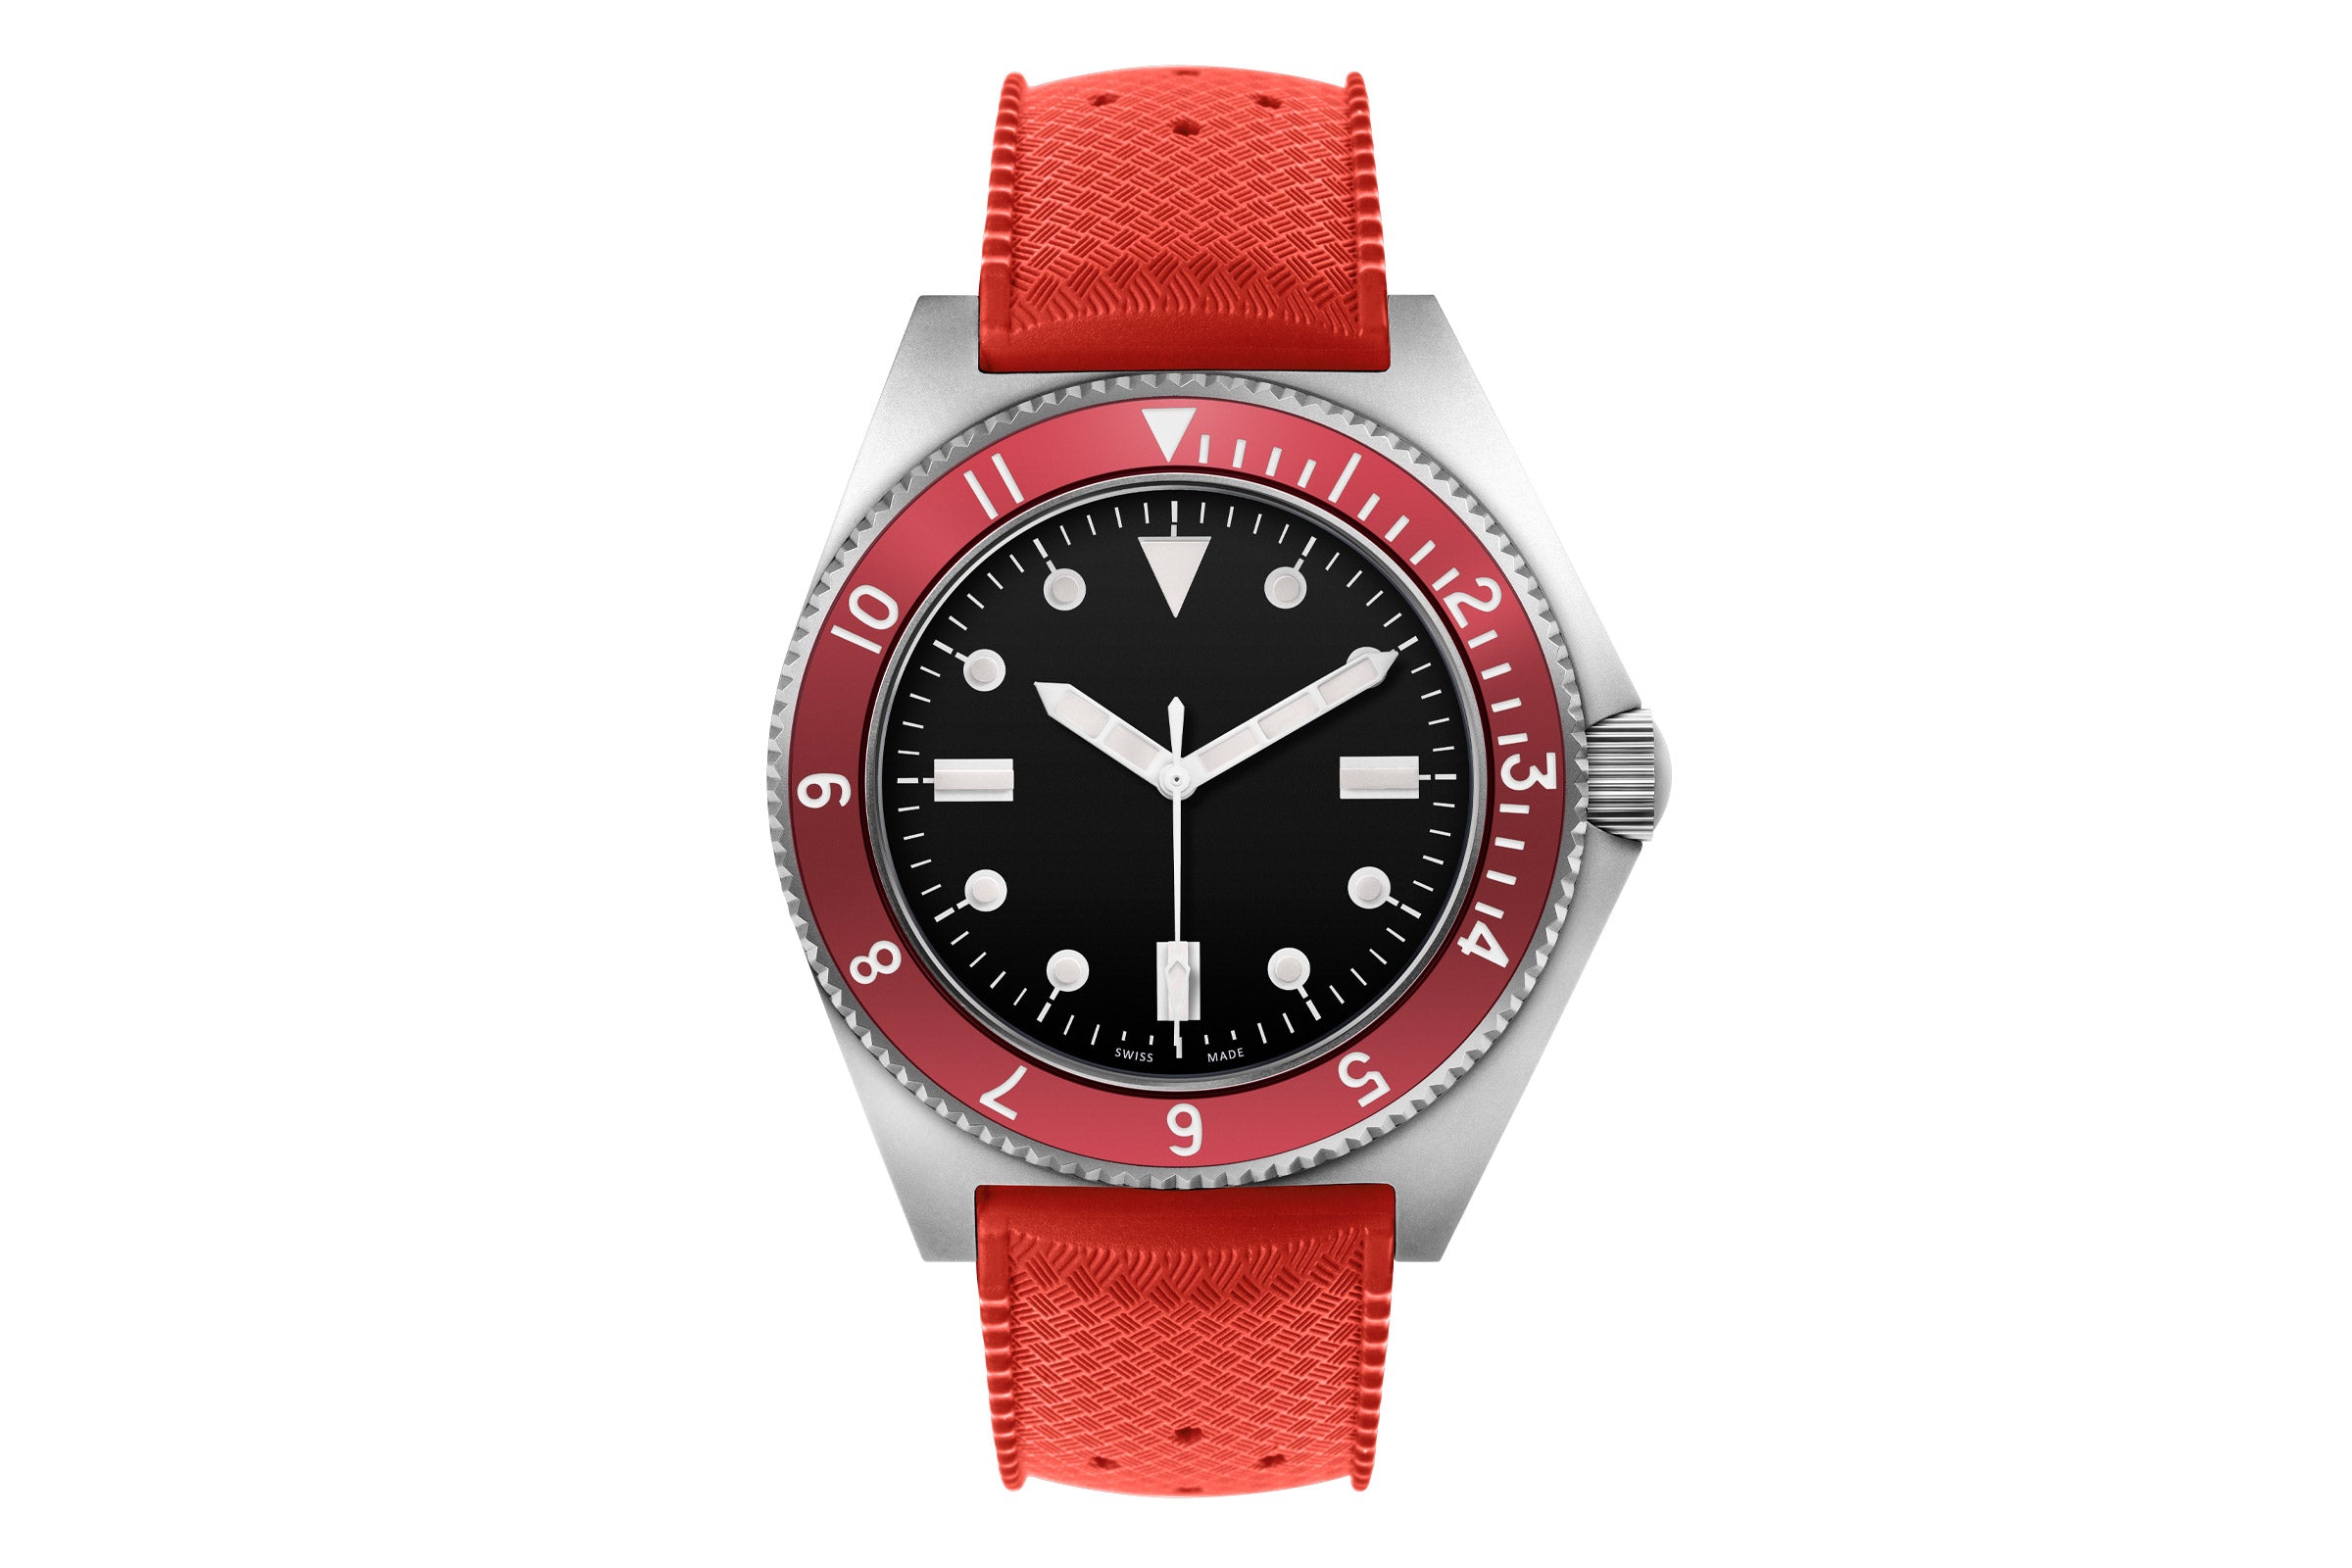 Type I-C Military Dive Watch